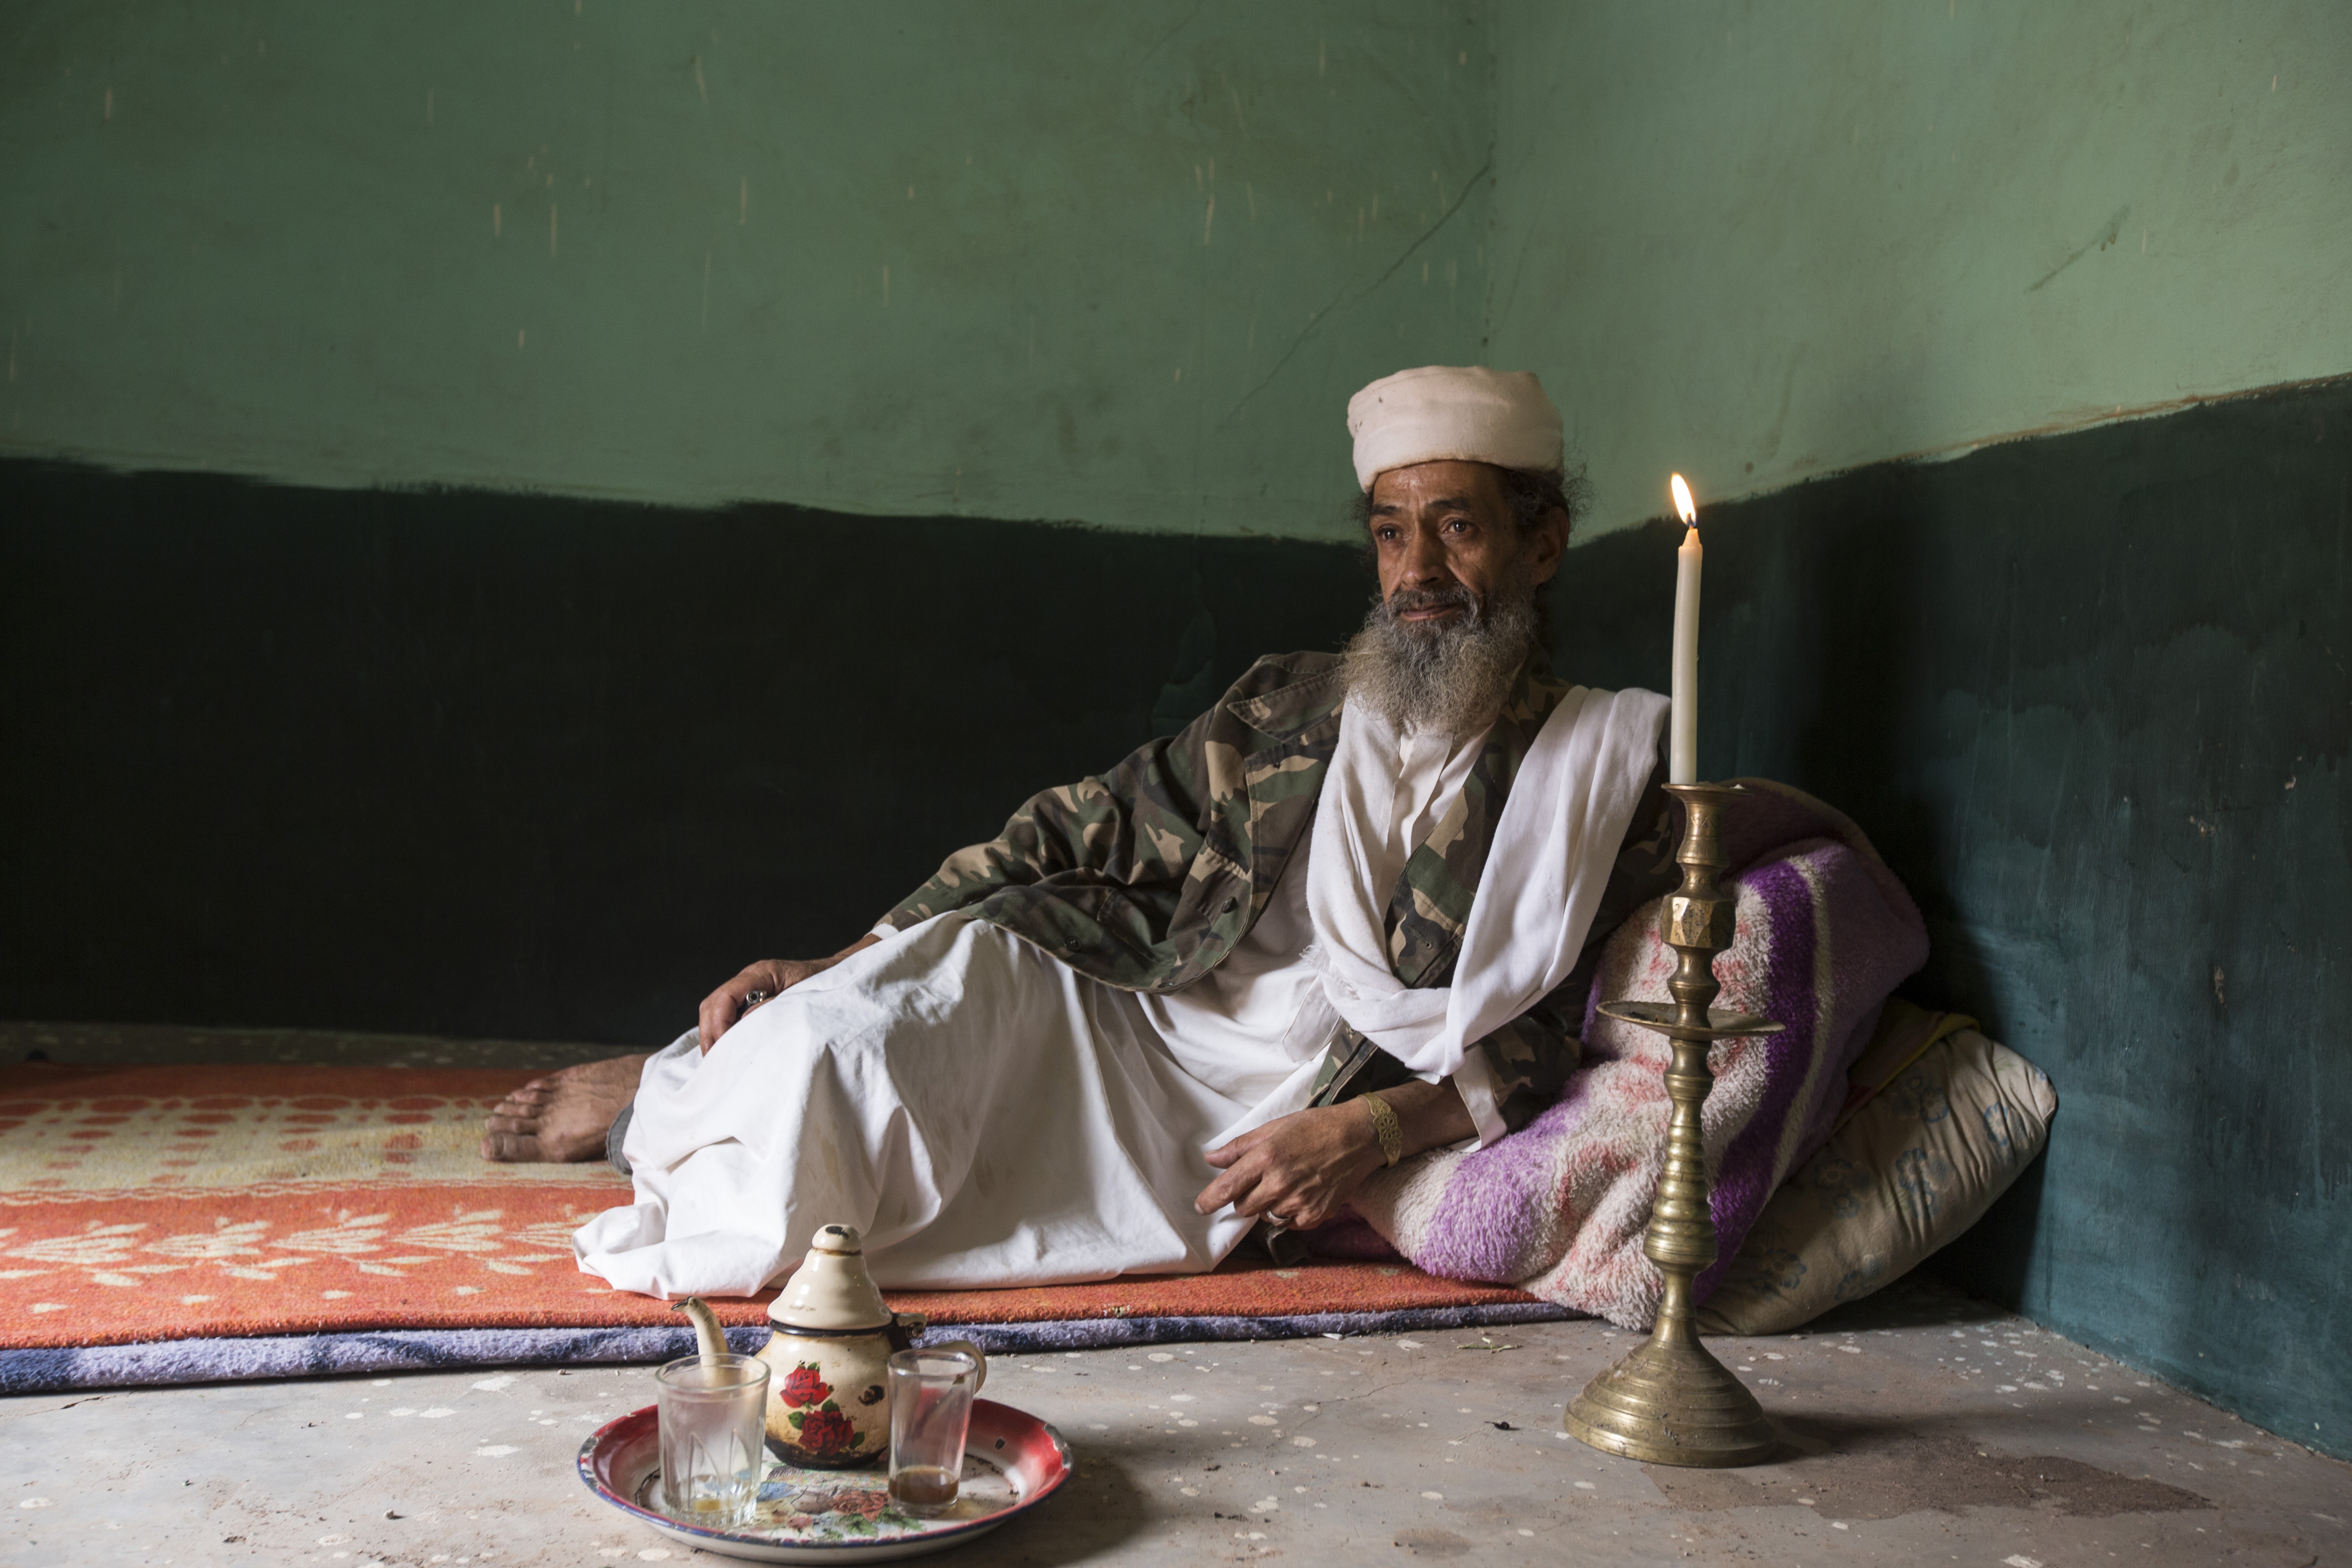 Nicknamed Osama bin Laden due to his resemblance to the late al-Qaeda leader, Abdelaziz Bouyadnaine, 59, is one of the longest-serving extras in Ouarzazate, Morocco. Pictures: Matilde Gattoni